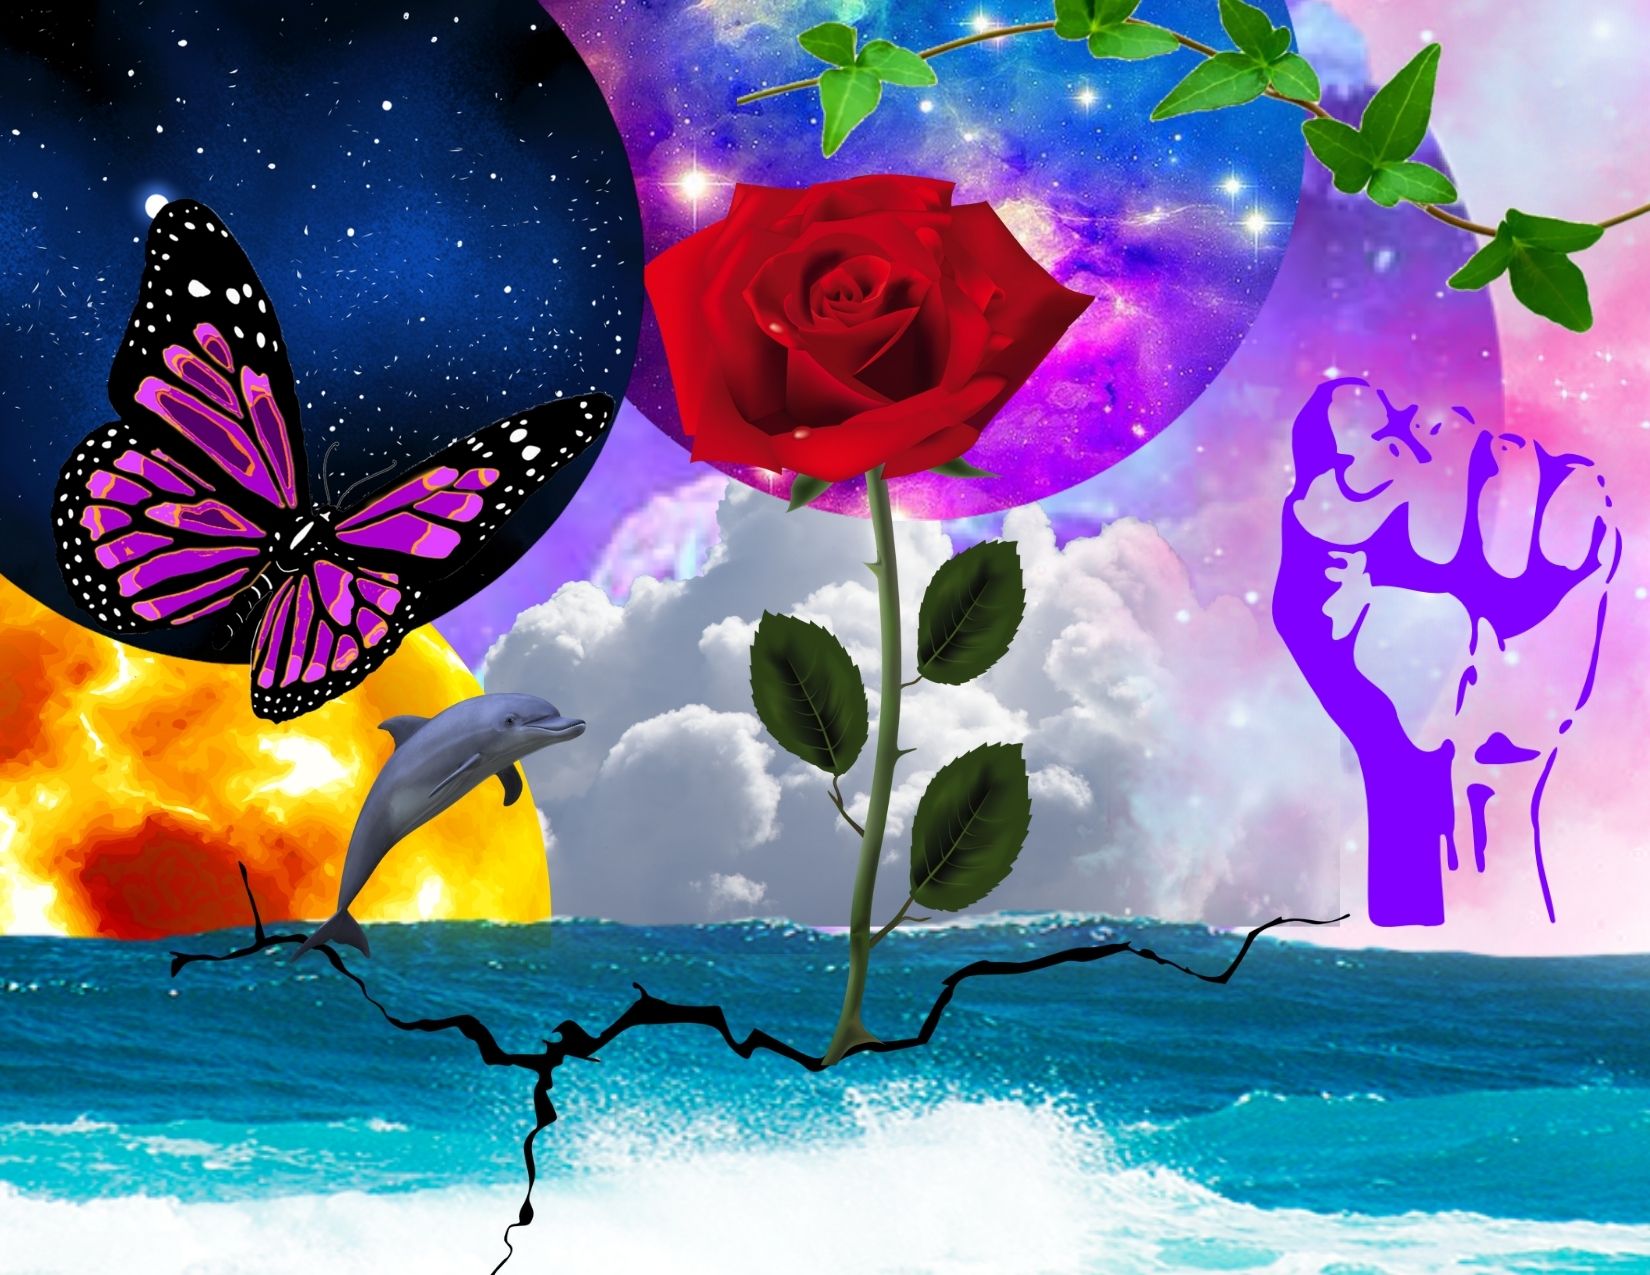 An imgage of an ocean with planets in the background. In the foreground there is a butterfly, a rose, a dolphin, and a fist.